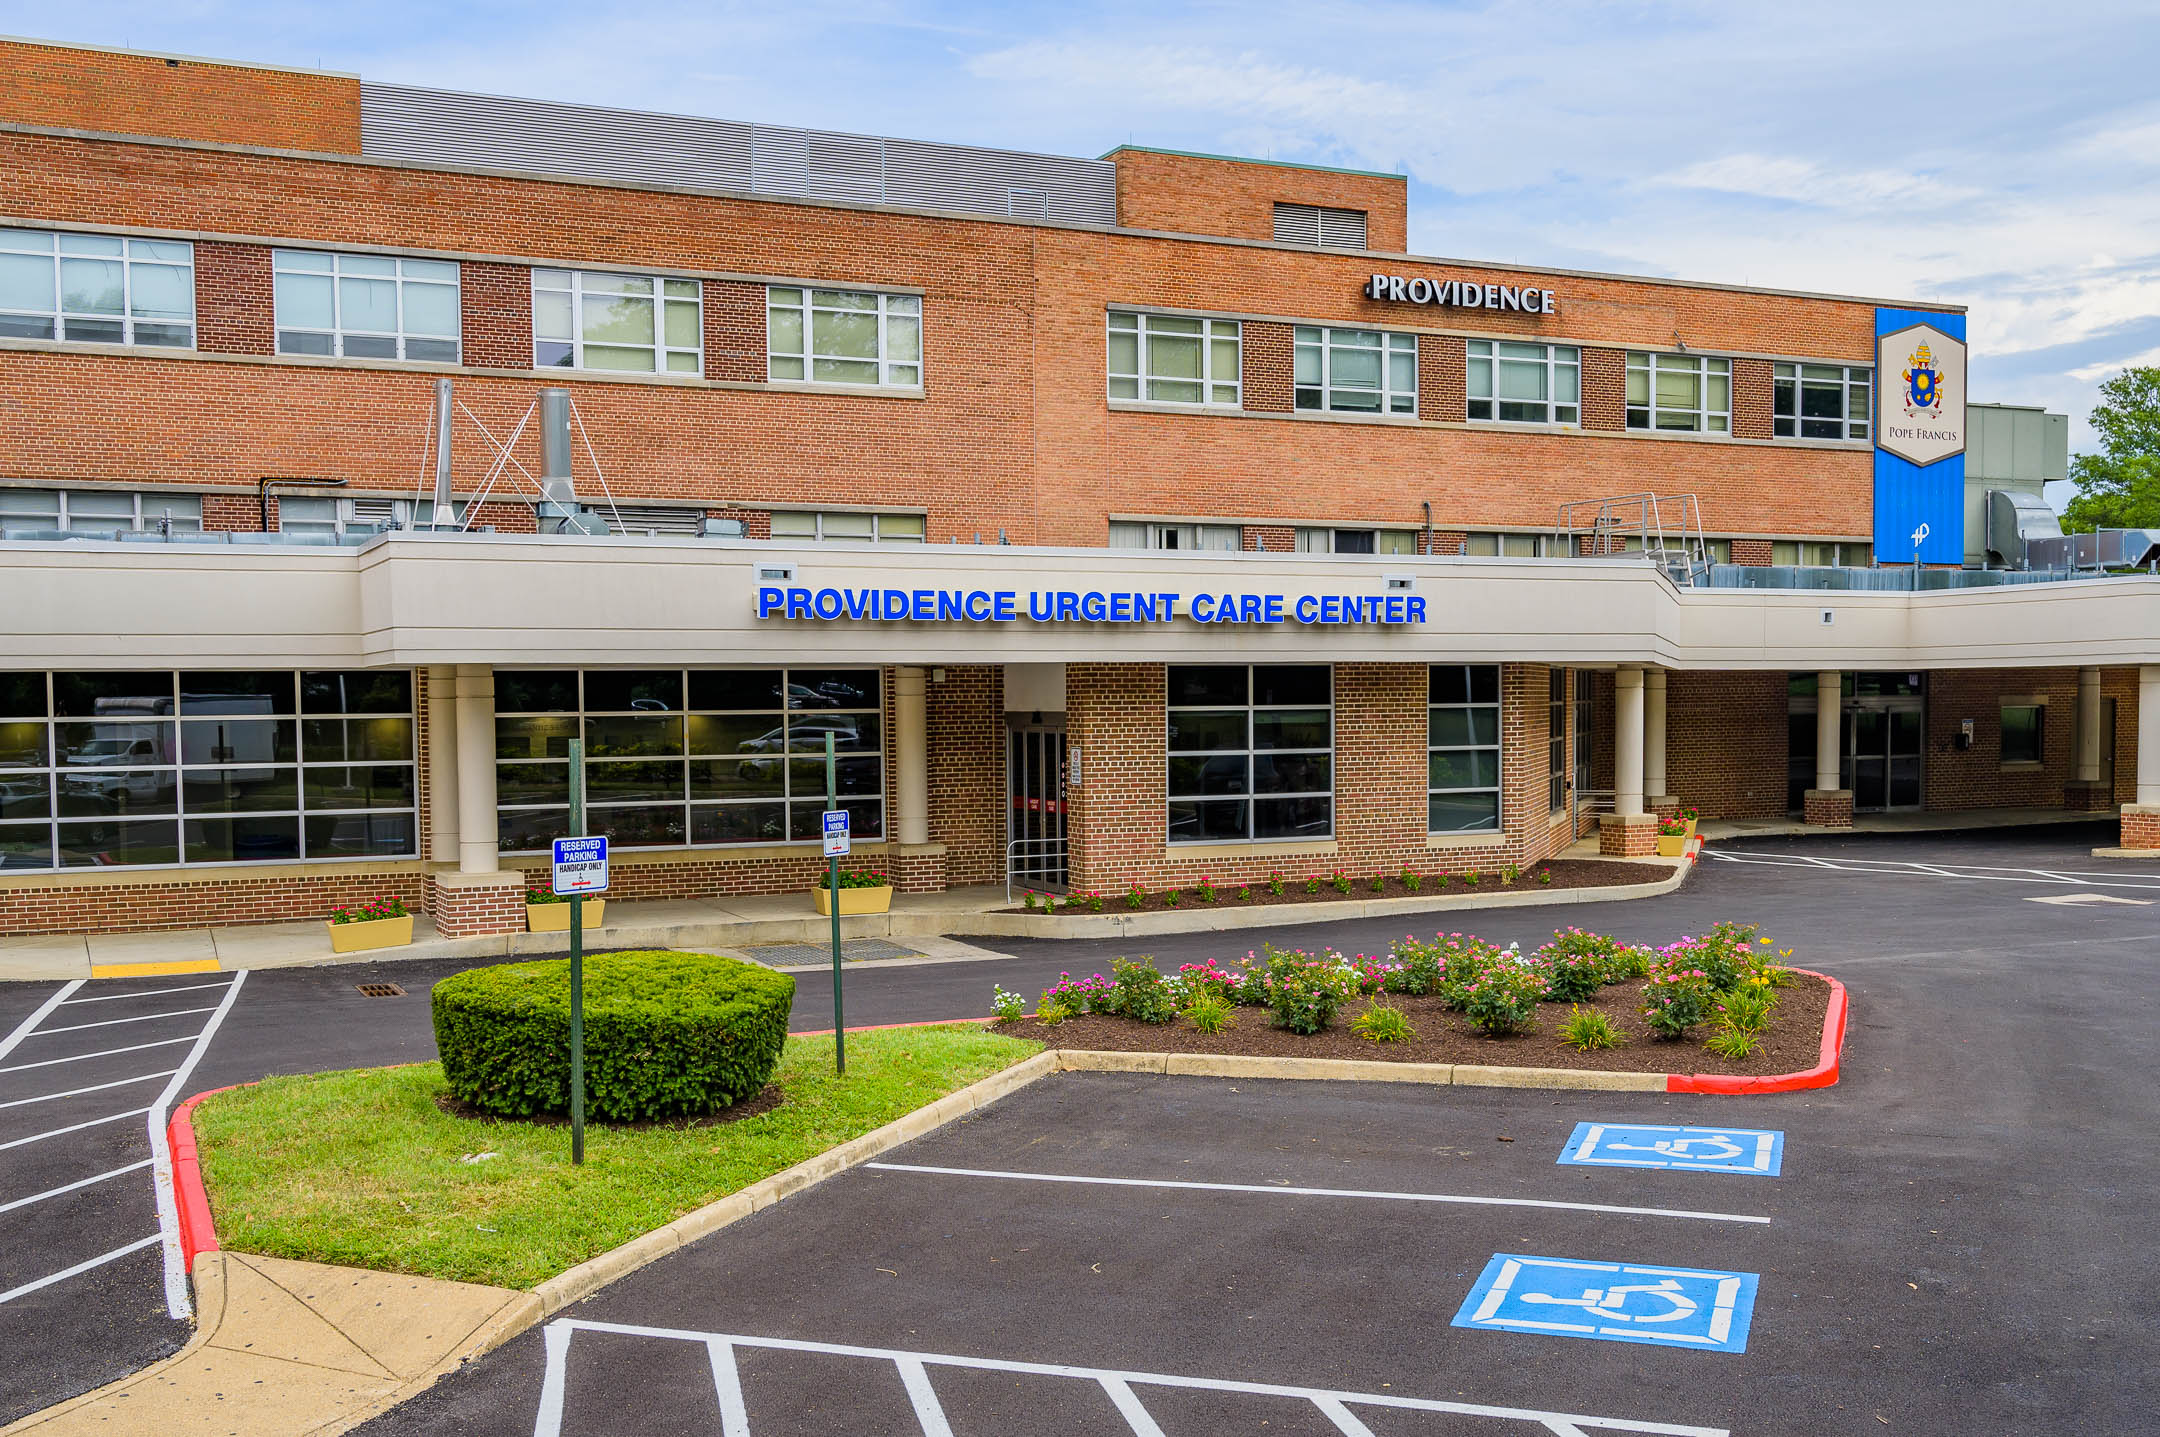 Providence Urgent Care Center opens in Washington, D.C.